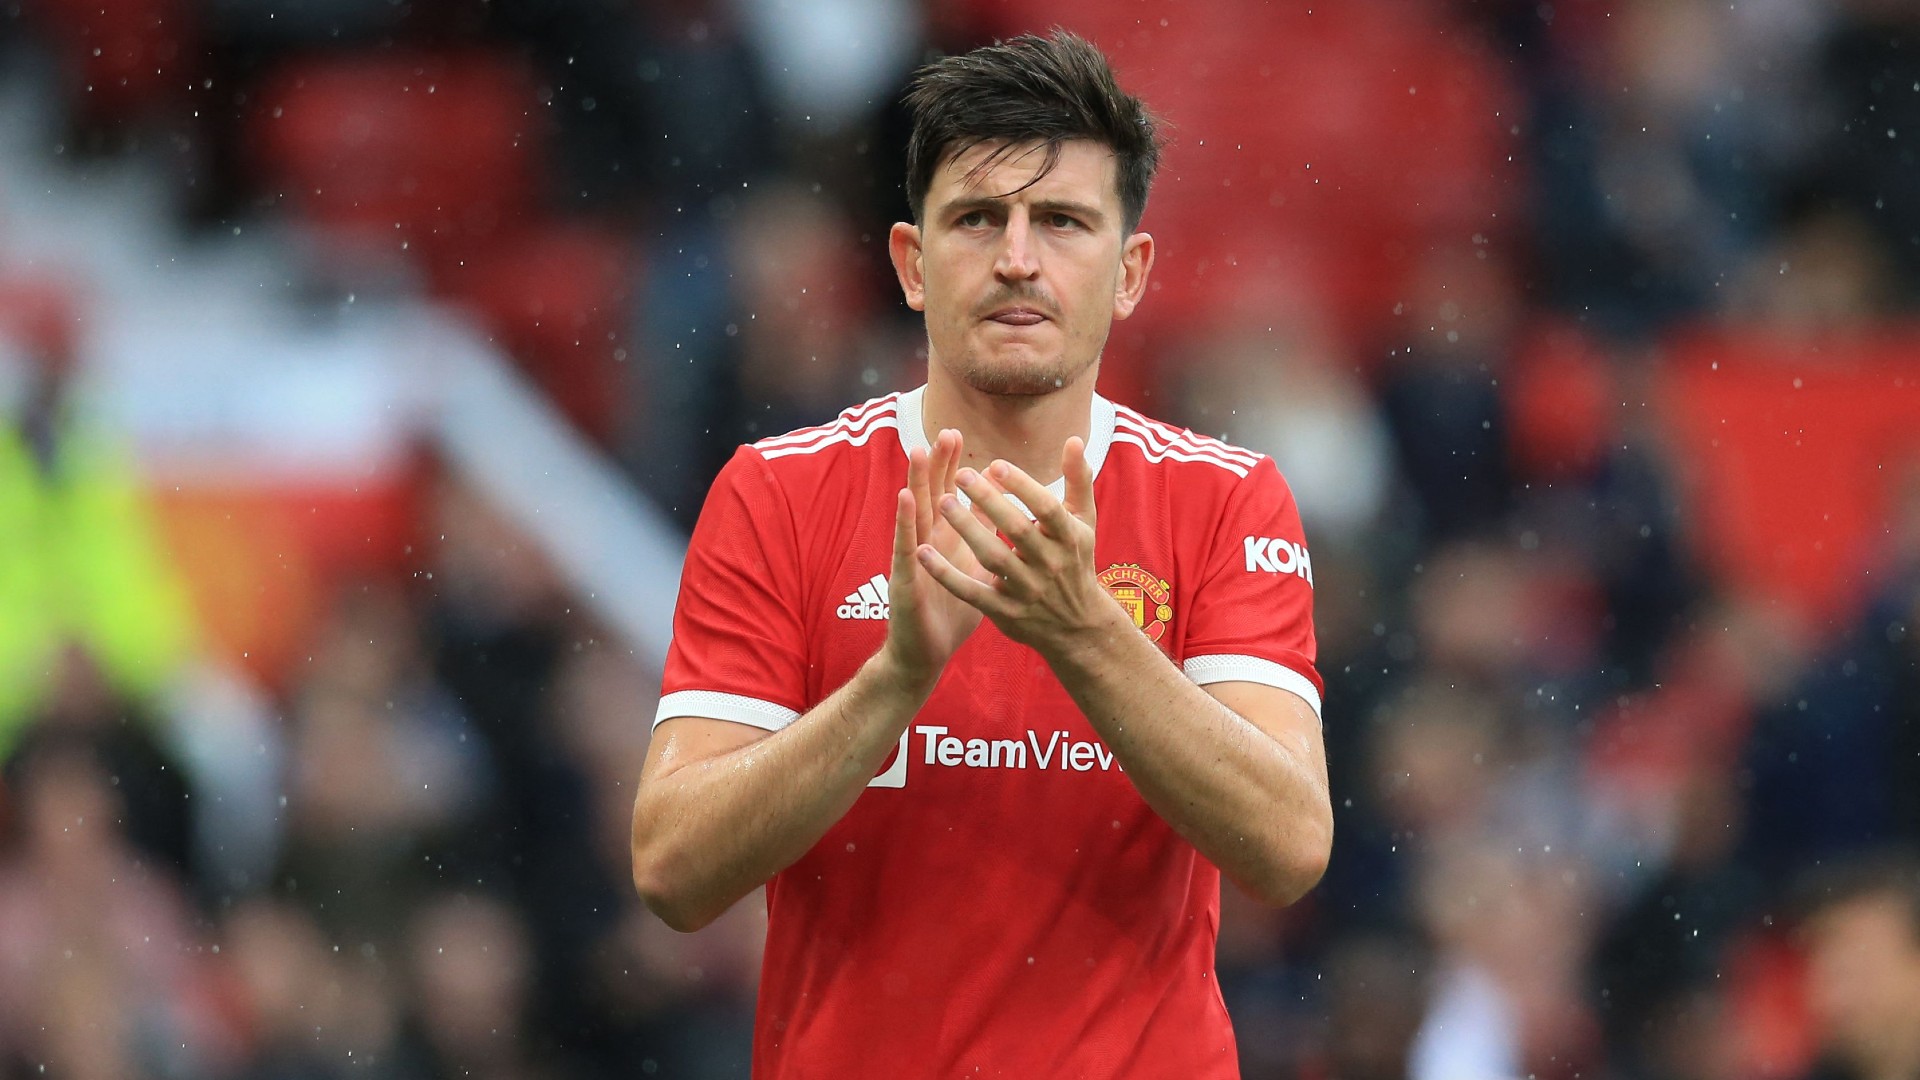 Maguire backs Sancho to be a 'real star' for Man Utd after protracted £73m transfer